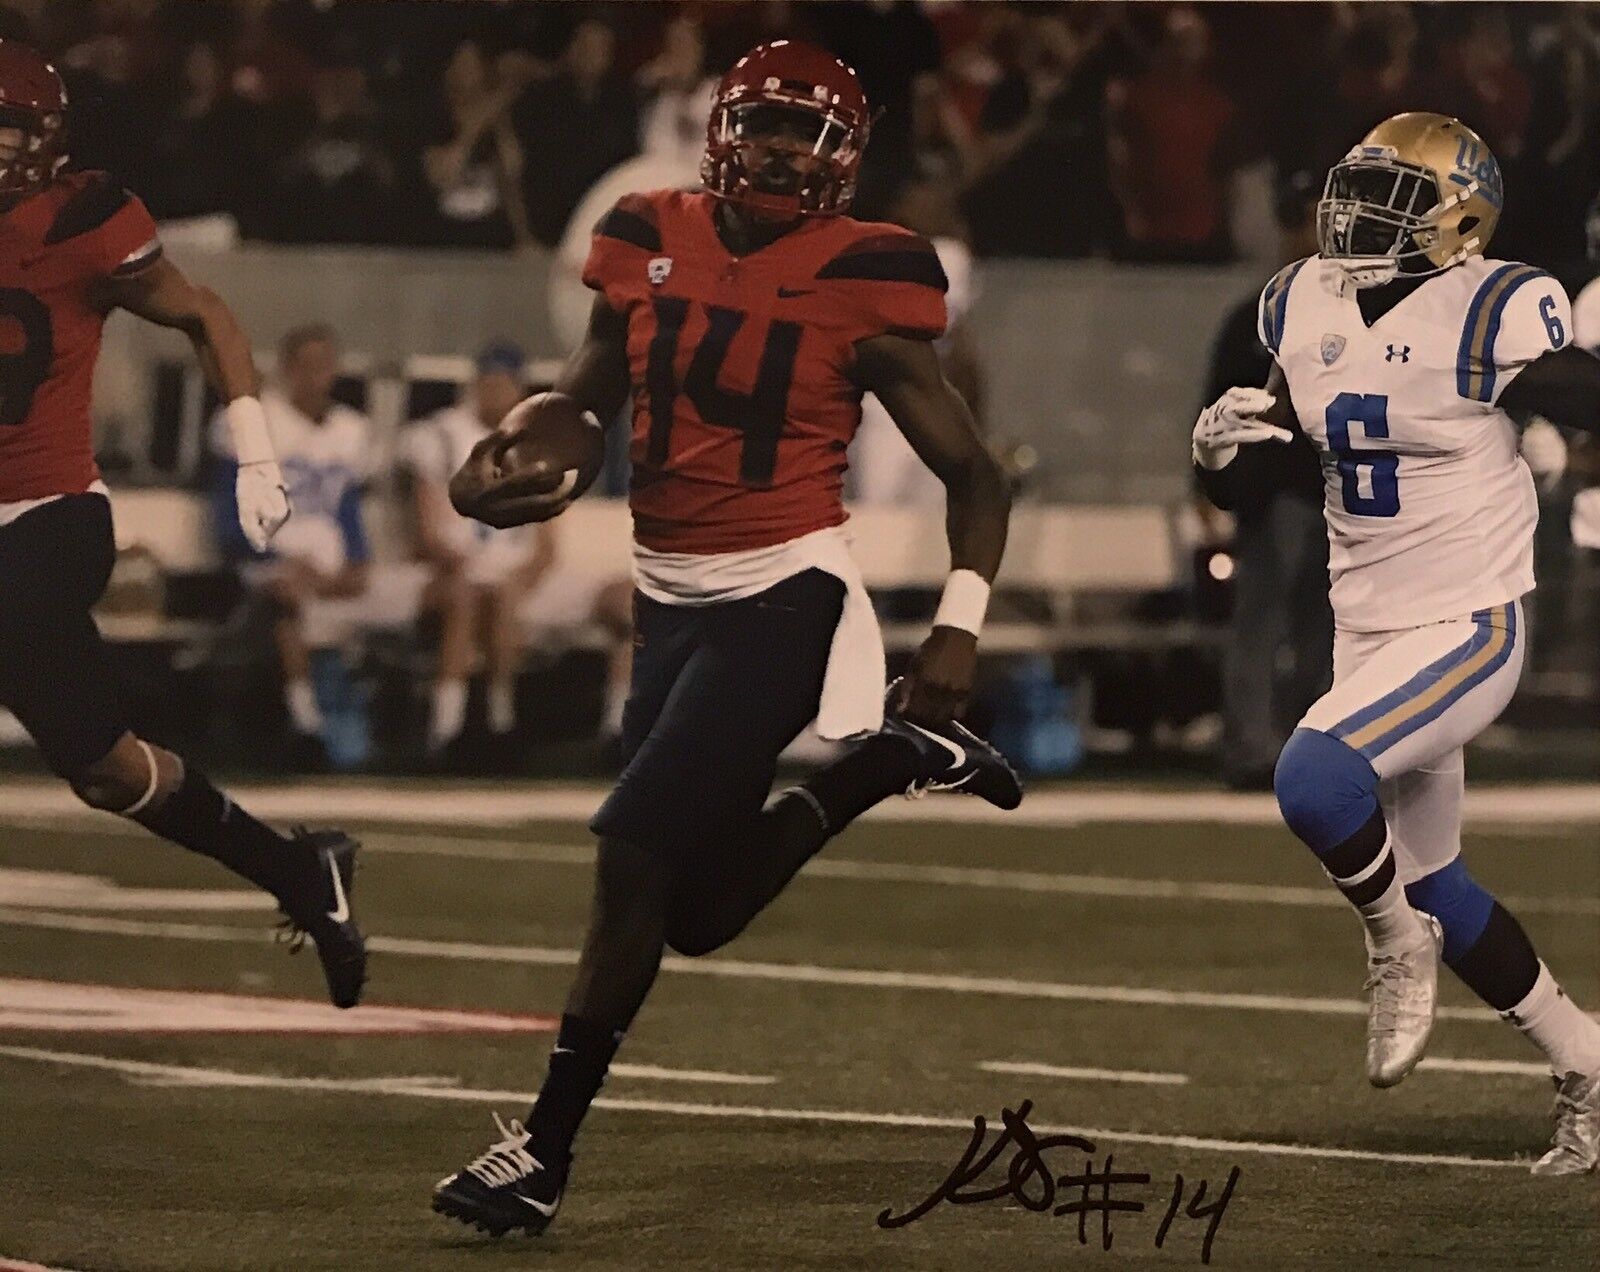 Khalil Tate Signed Autographed Arizona Wildcats 8x10 Photo Poster painting Highlight Reel Coa